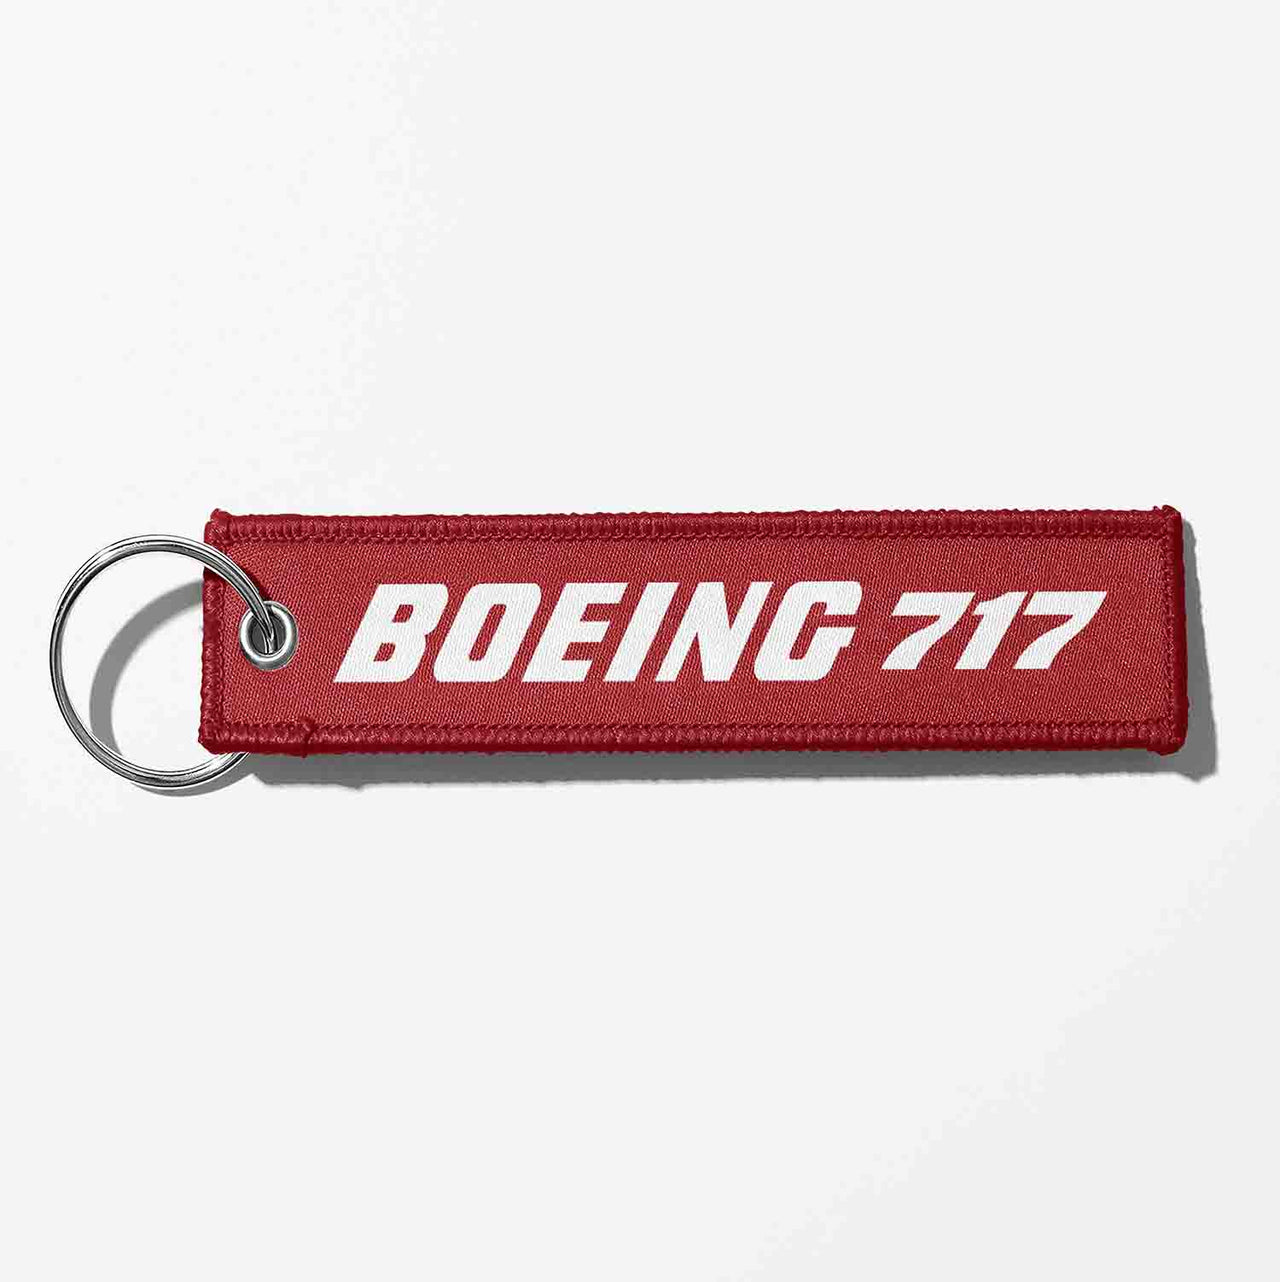 Boeing 717 & Text Designed Key Chains